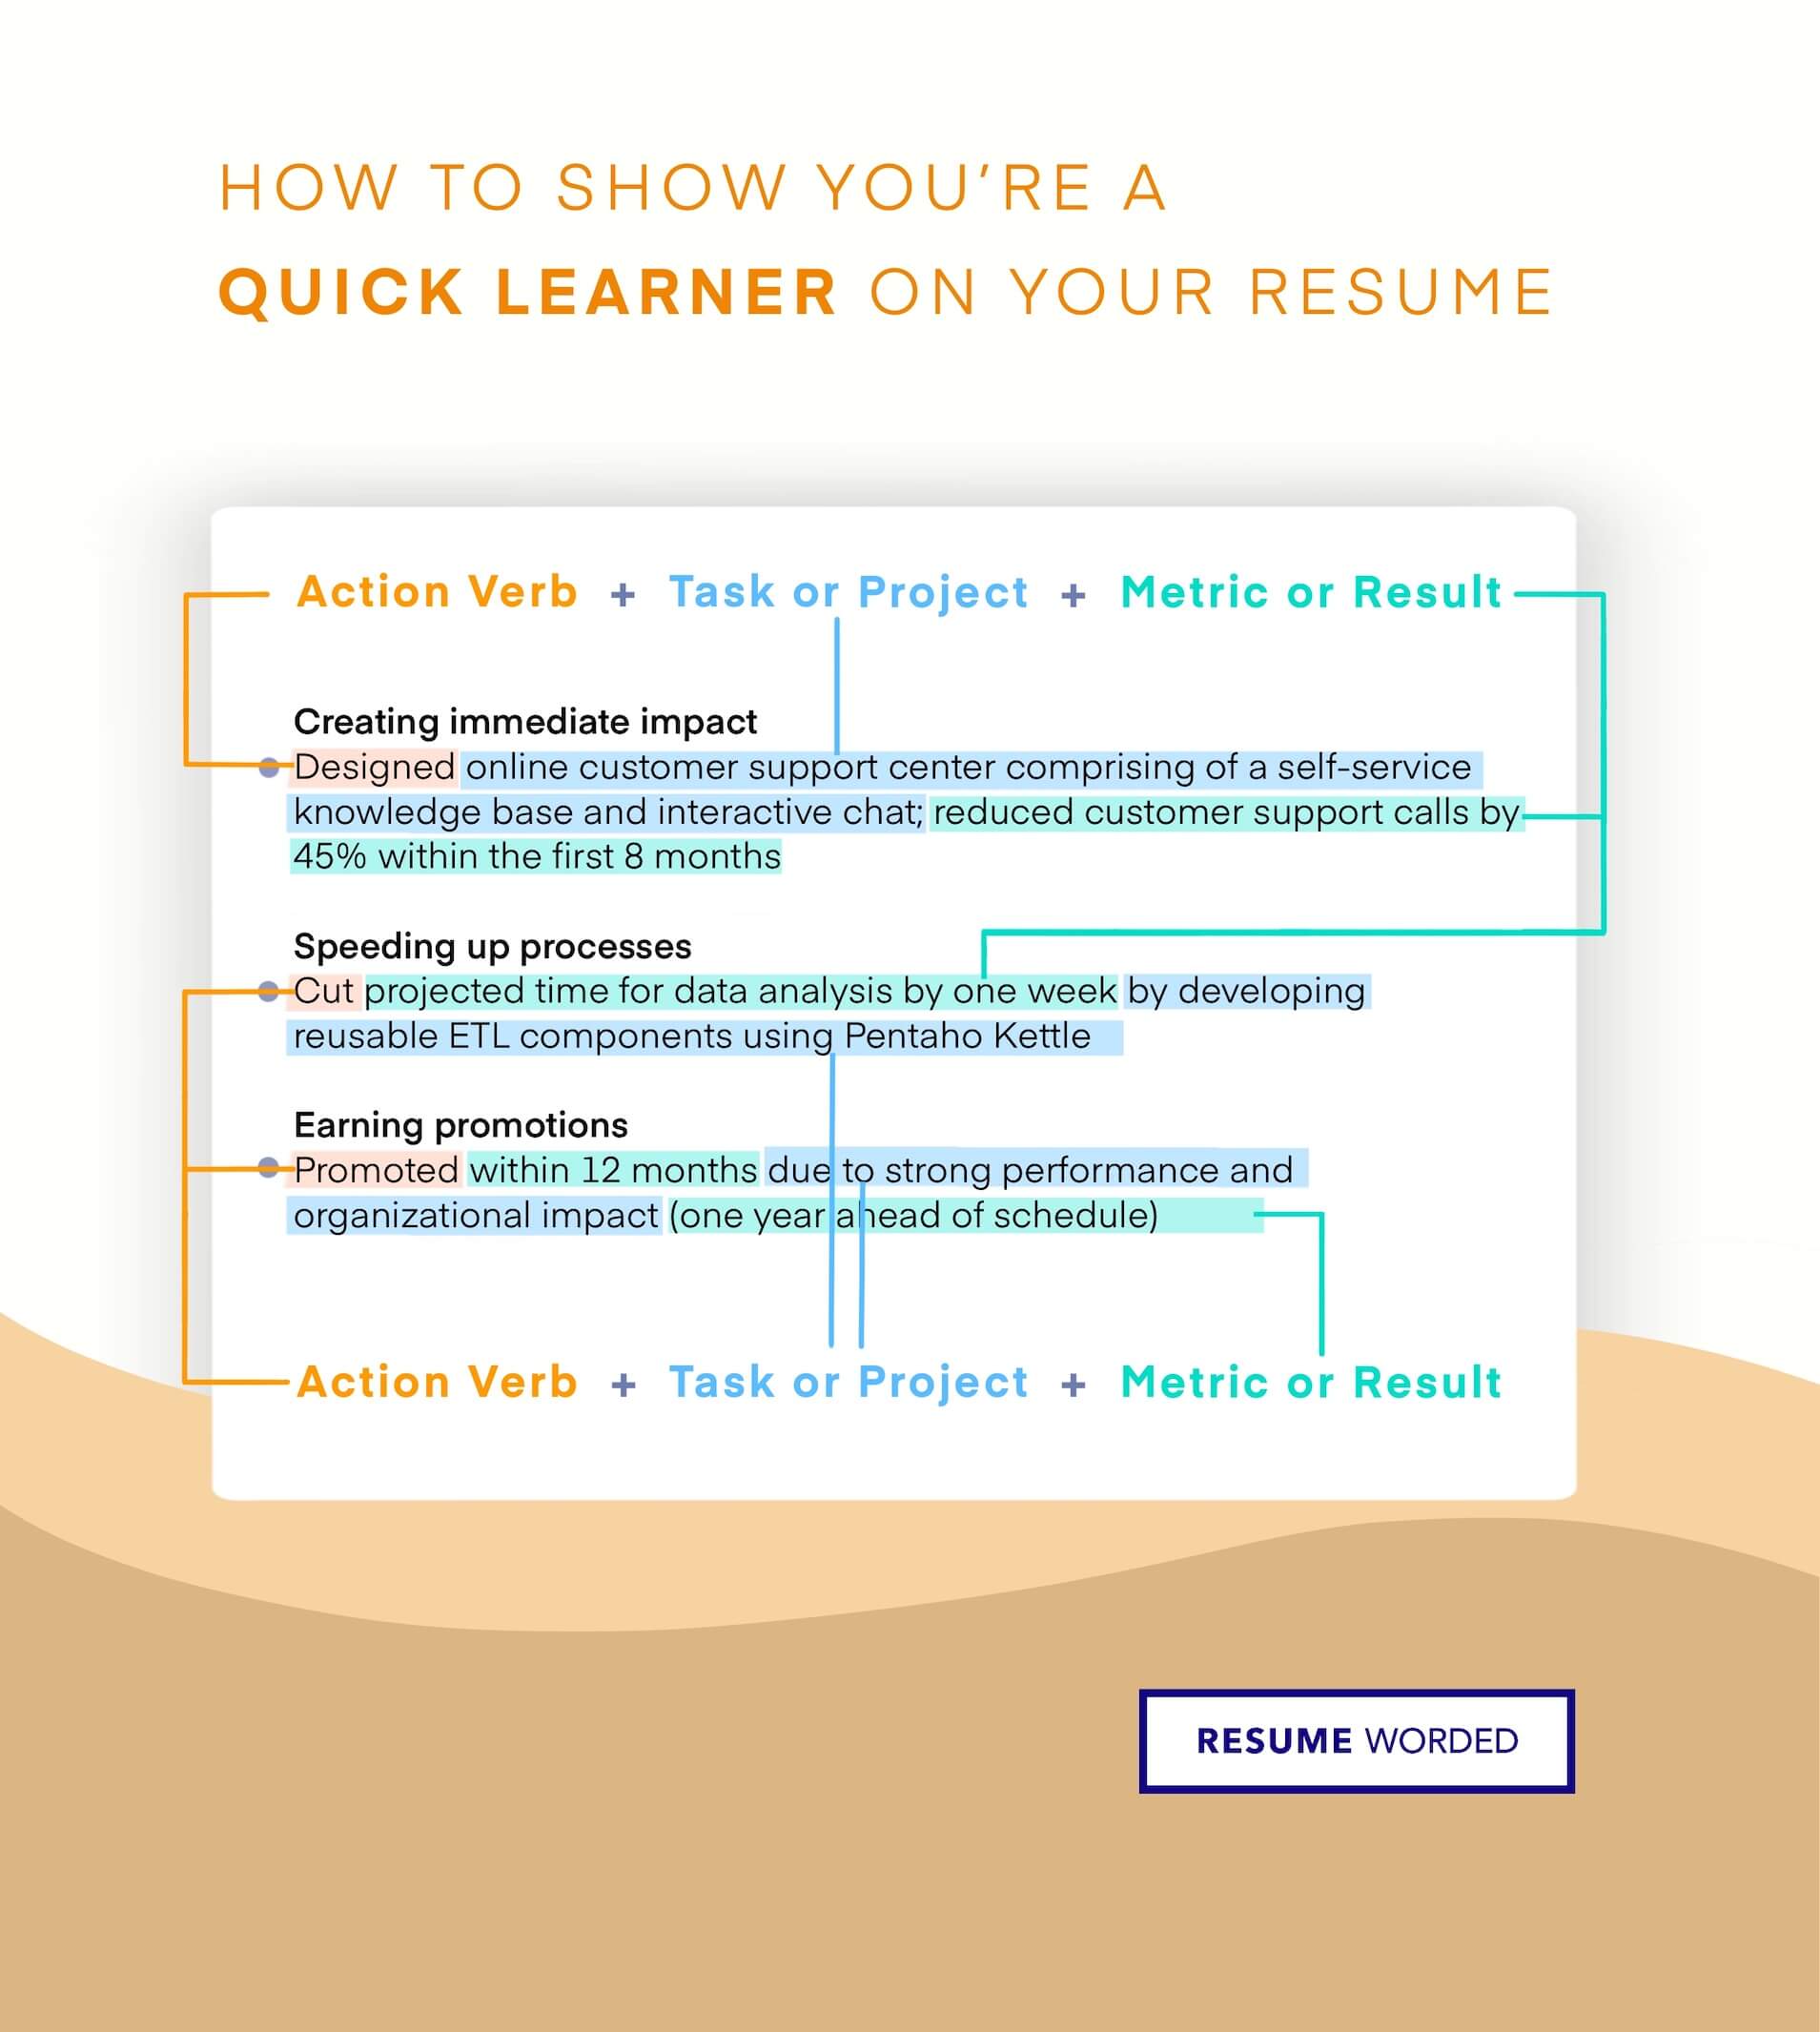 Include virtual learning tools in your skills list. - High School Teacher Resume